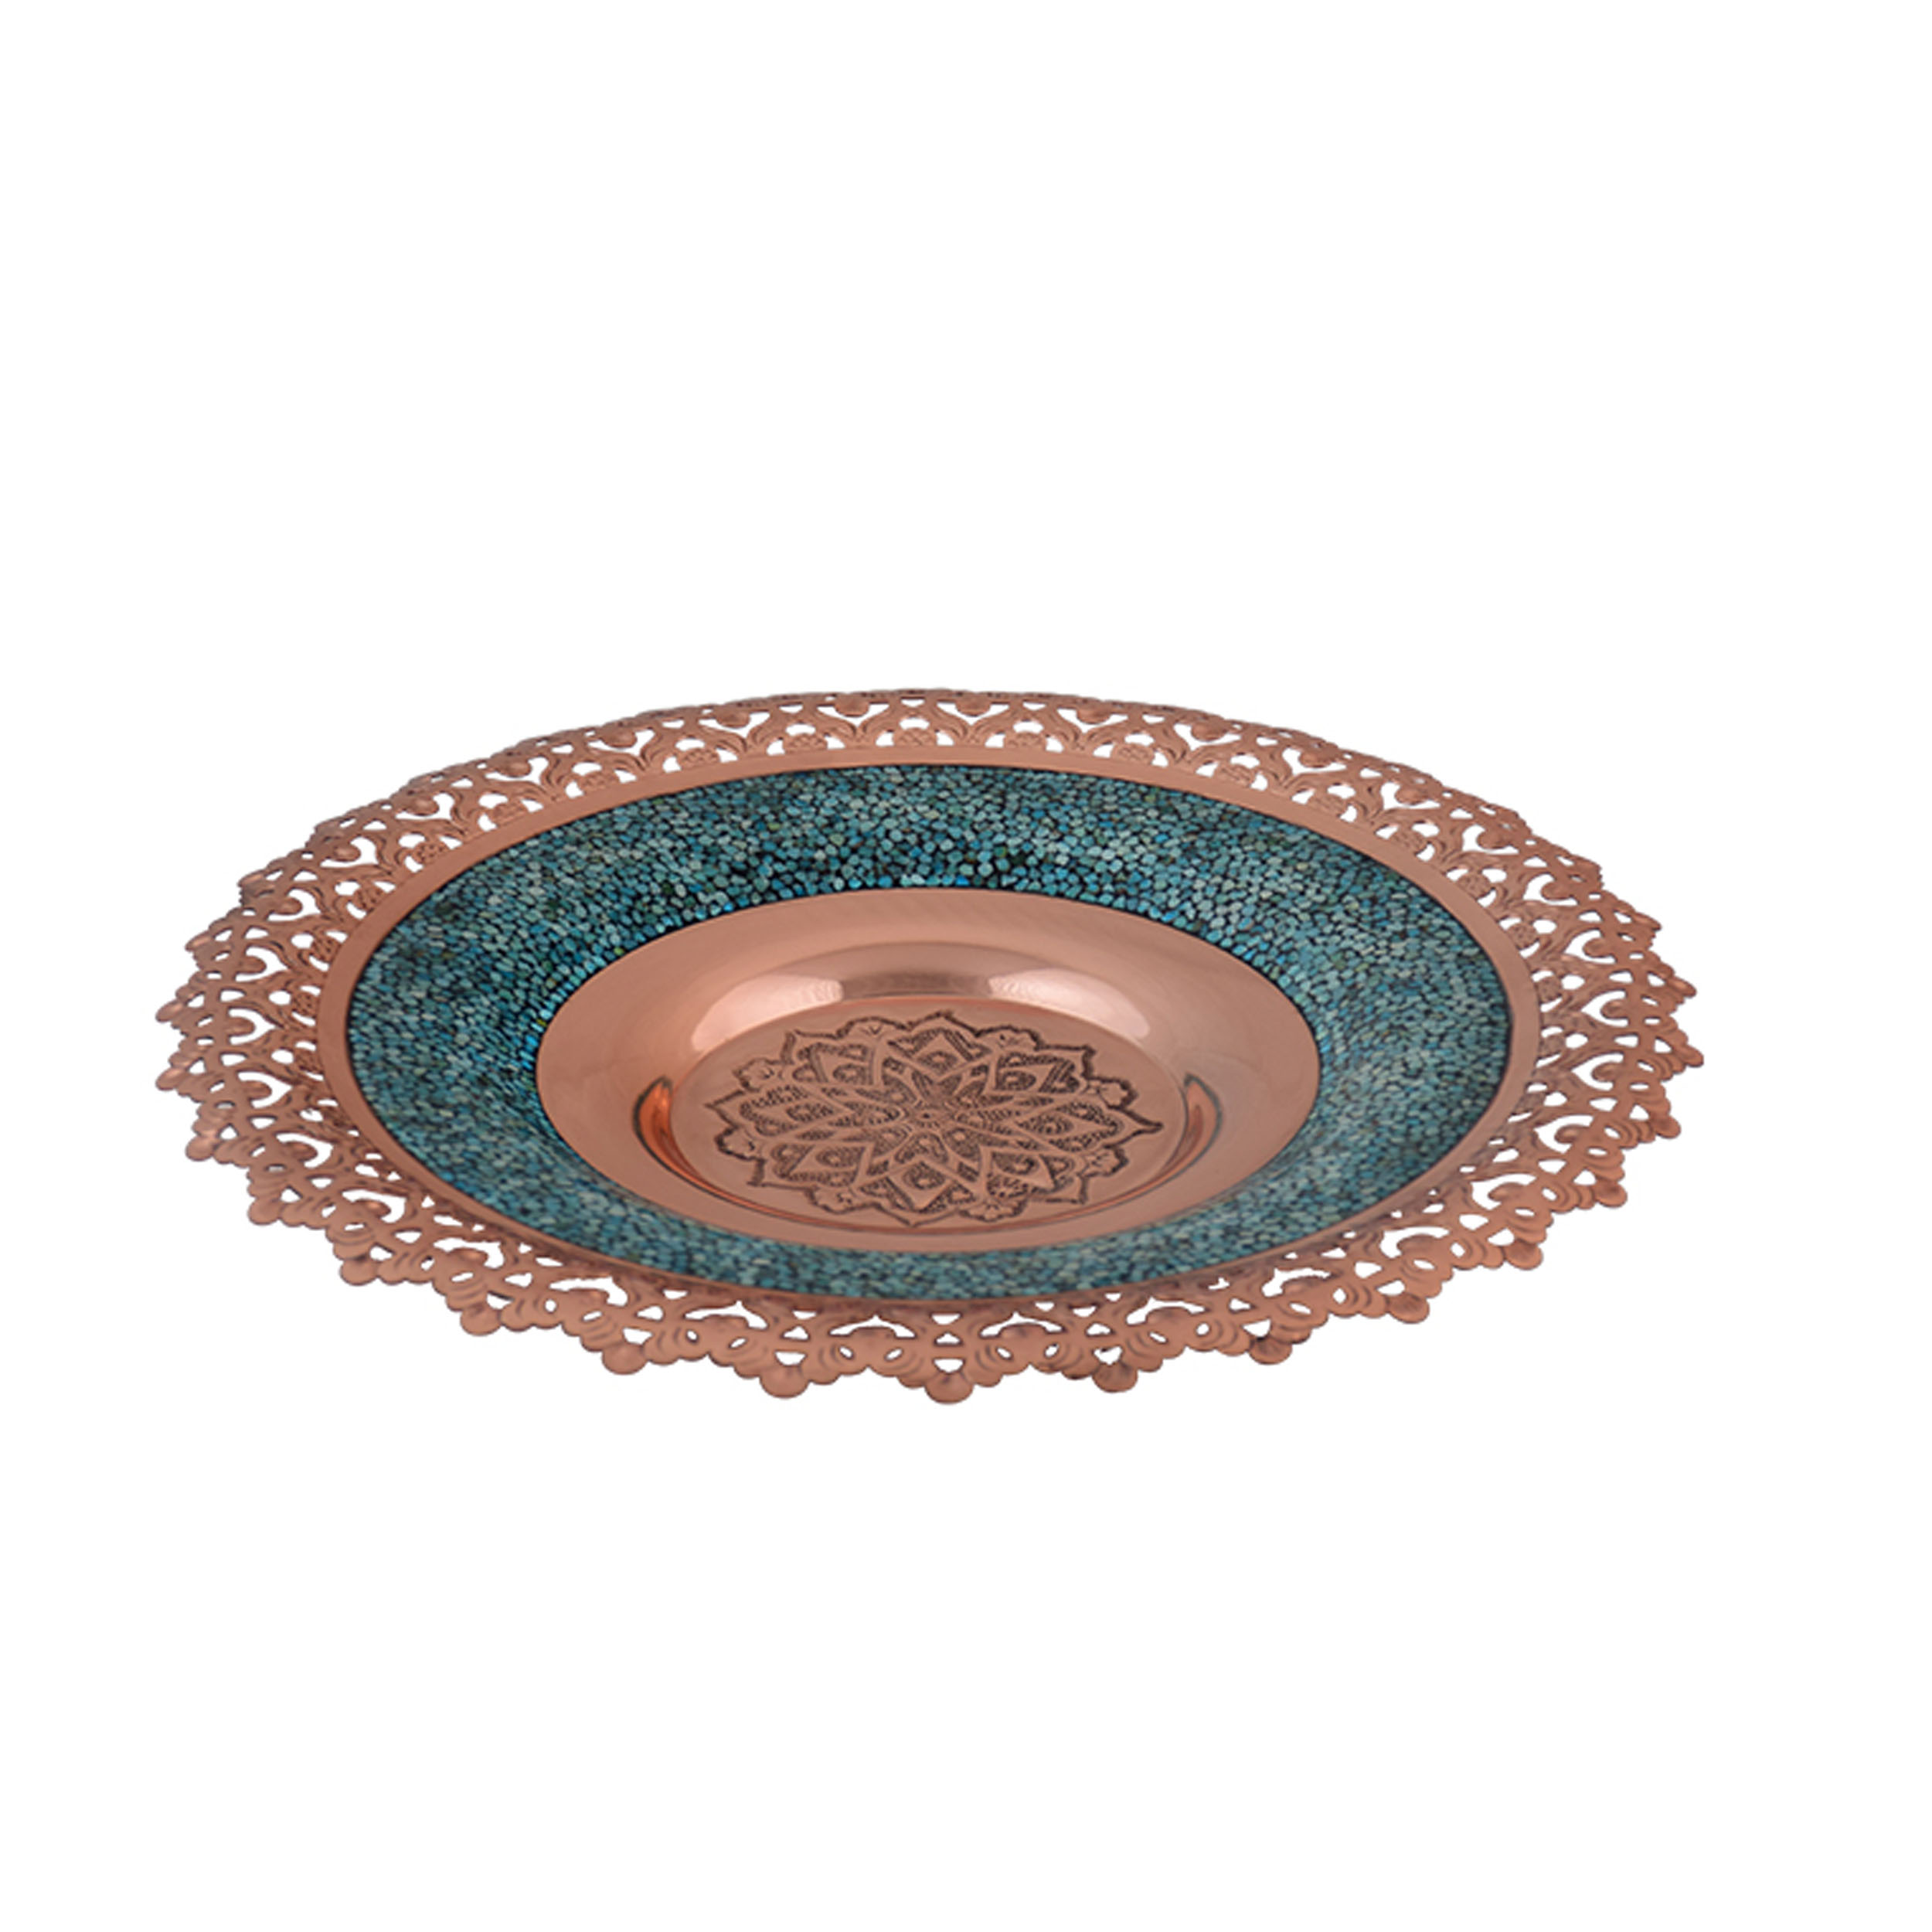 AGHAJANI Handicrafts Turquoise inlaying Bowl and Plate code F0071 